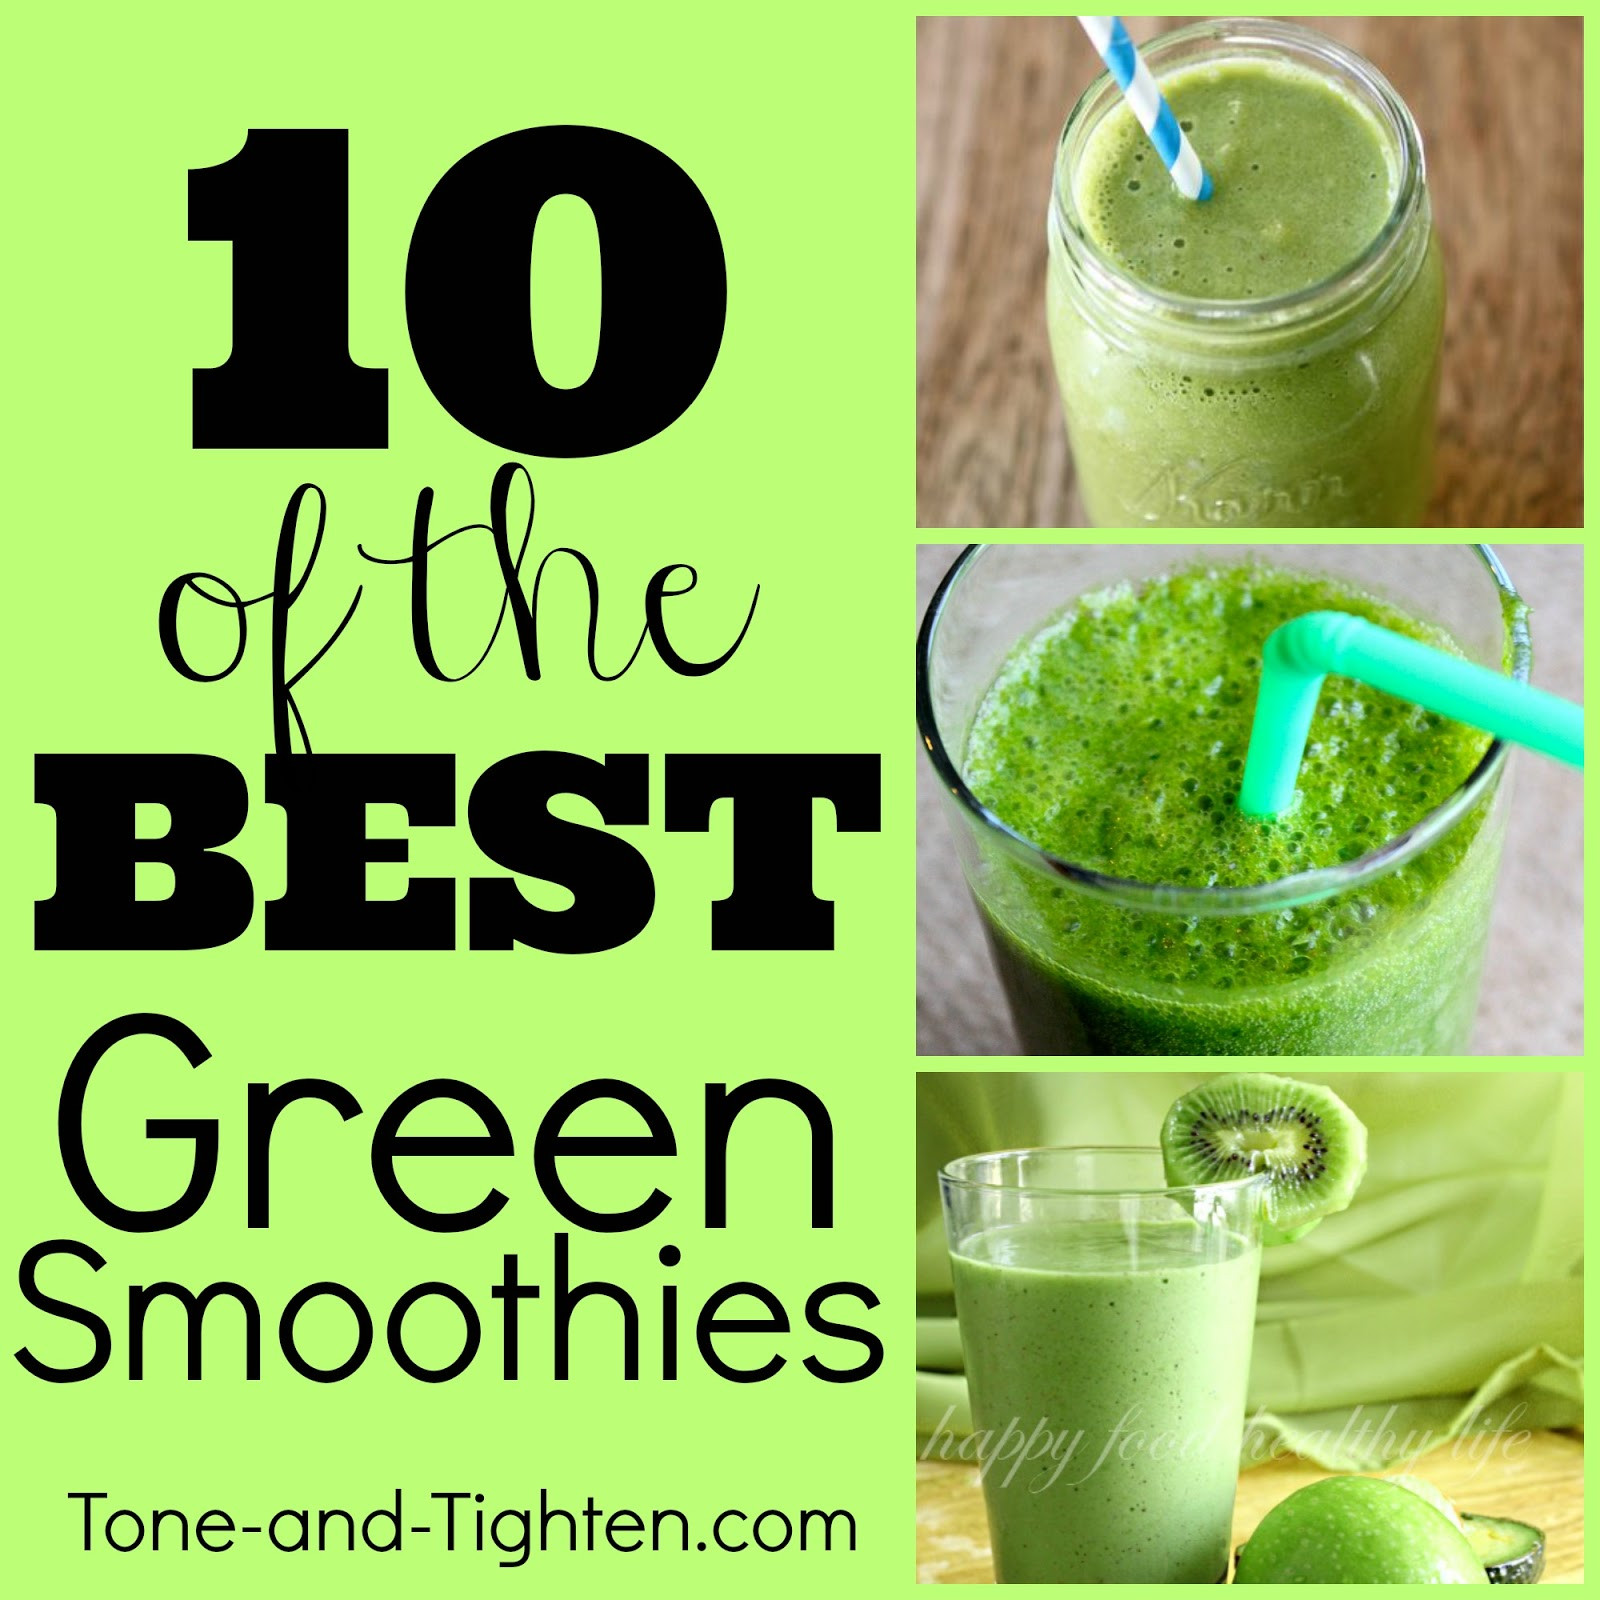 Best Green Smoothie Recipes
 10 of the Best Green Smoothie Recipes